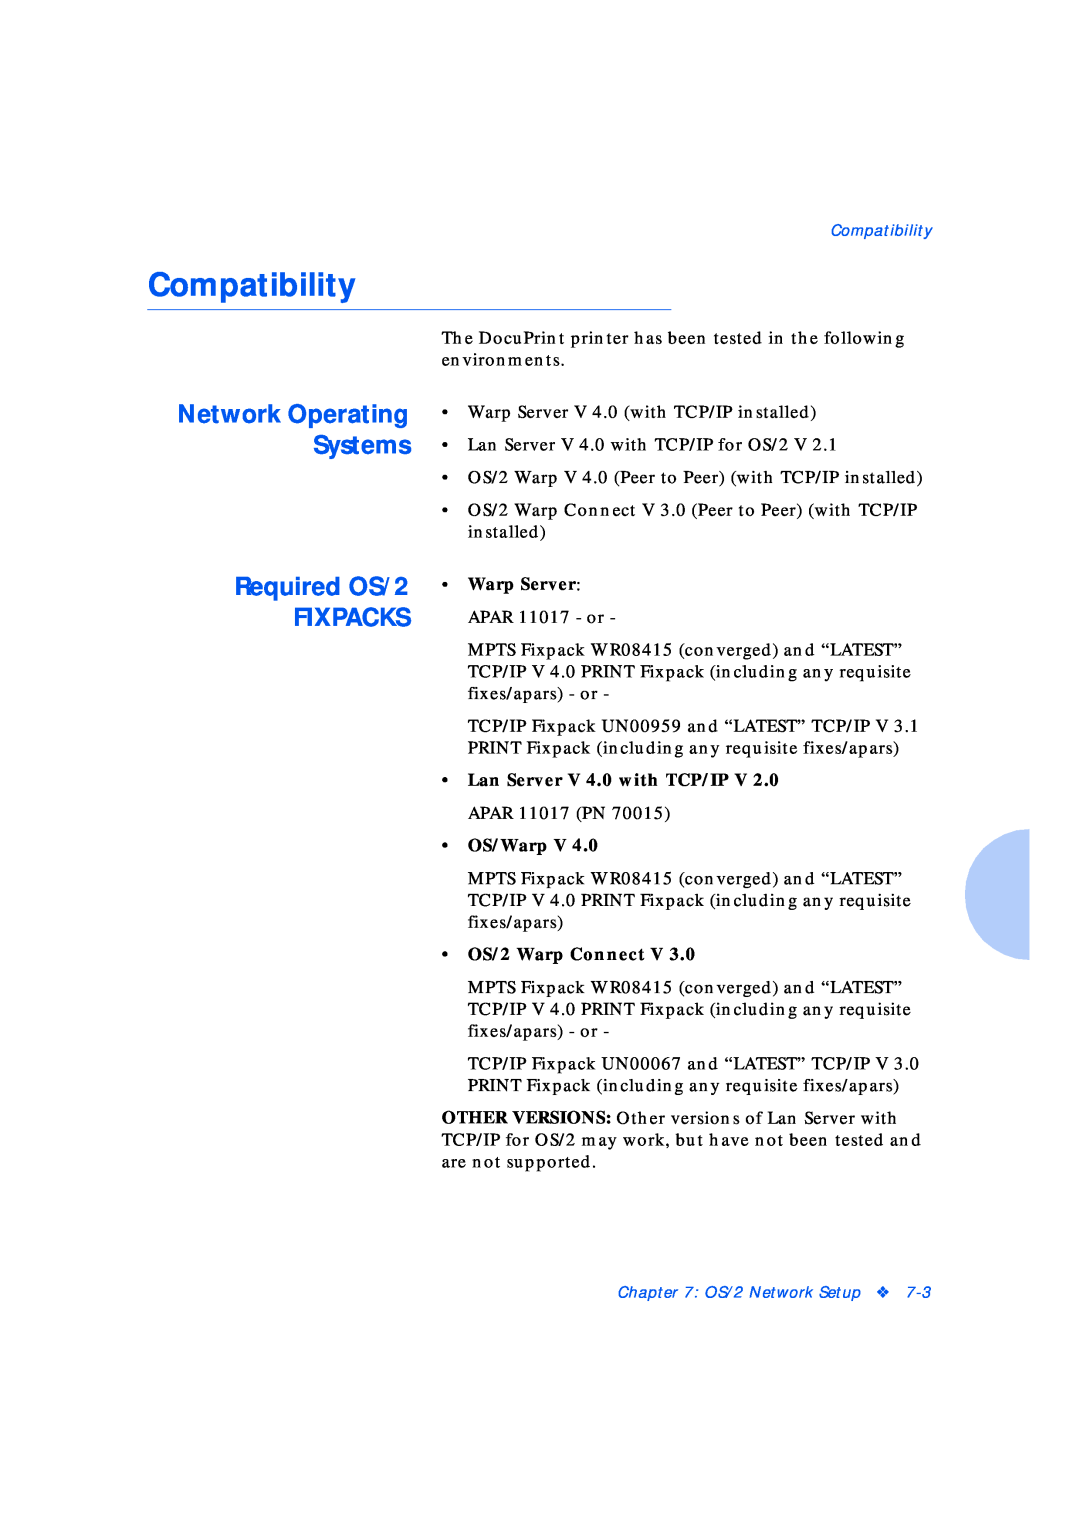 Xerox Network Laser Printers Compatibility, Required OS/2 FIXPACKS, Network Operating Systems, Warp Server APAR 11017 - or 